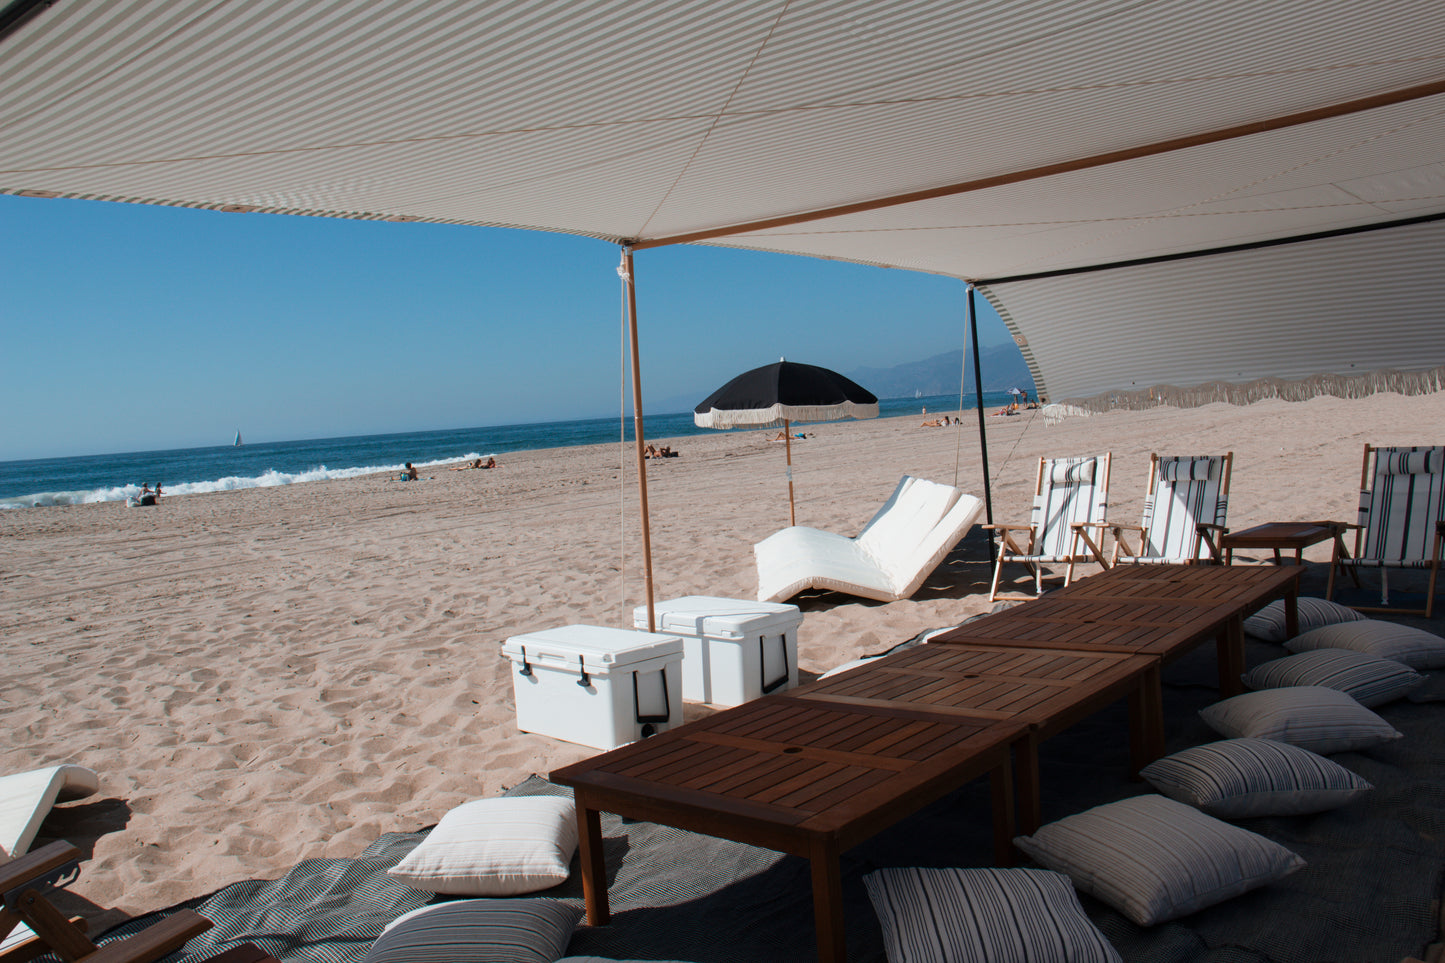 Beach lounge event rental for special events in Los Angeles